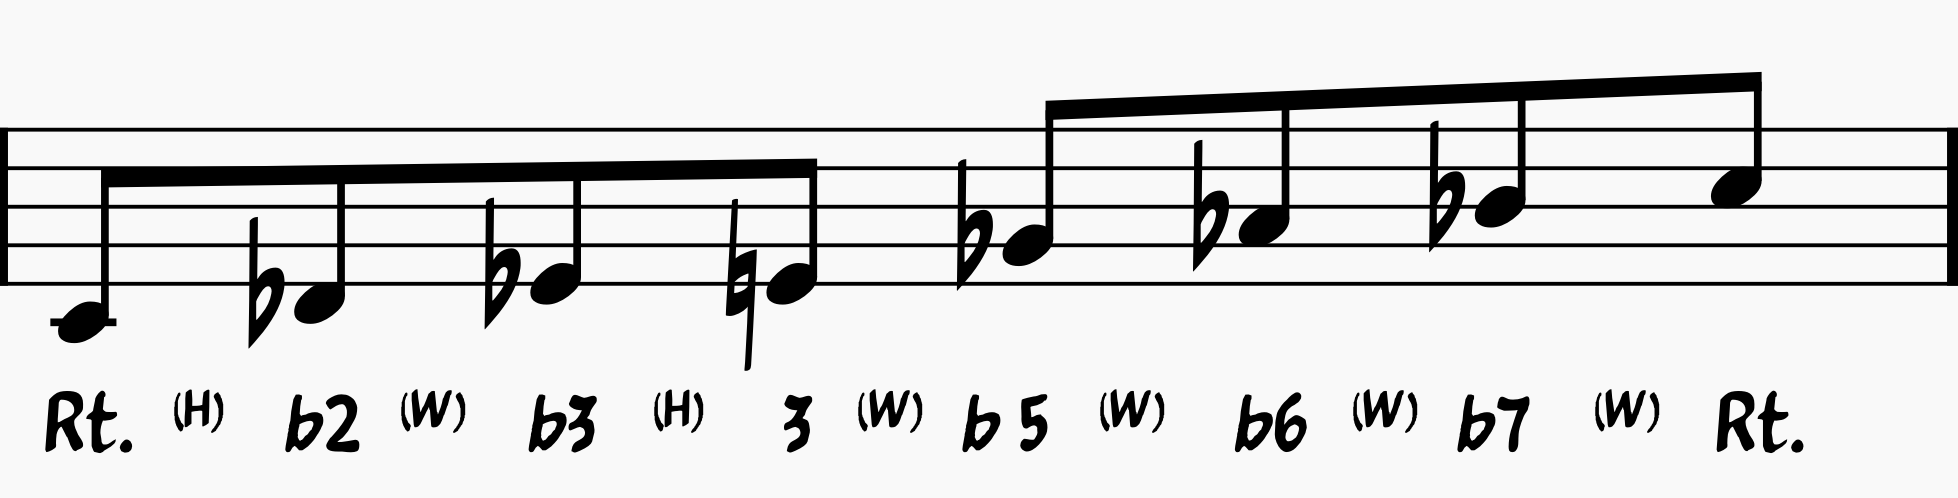 C Altered Scale with tones and steps 